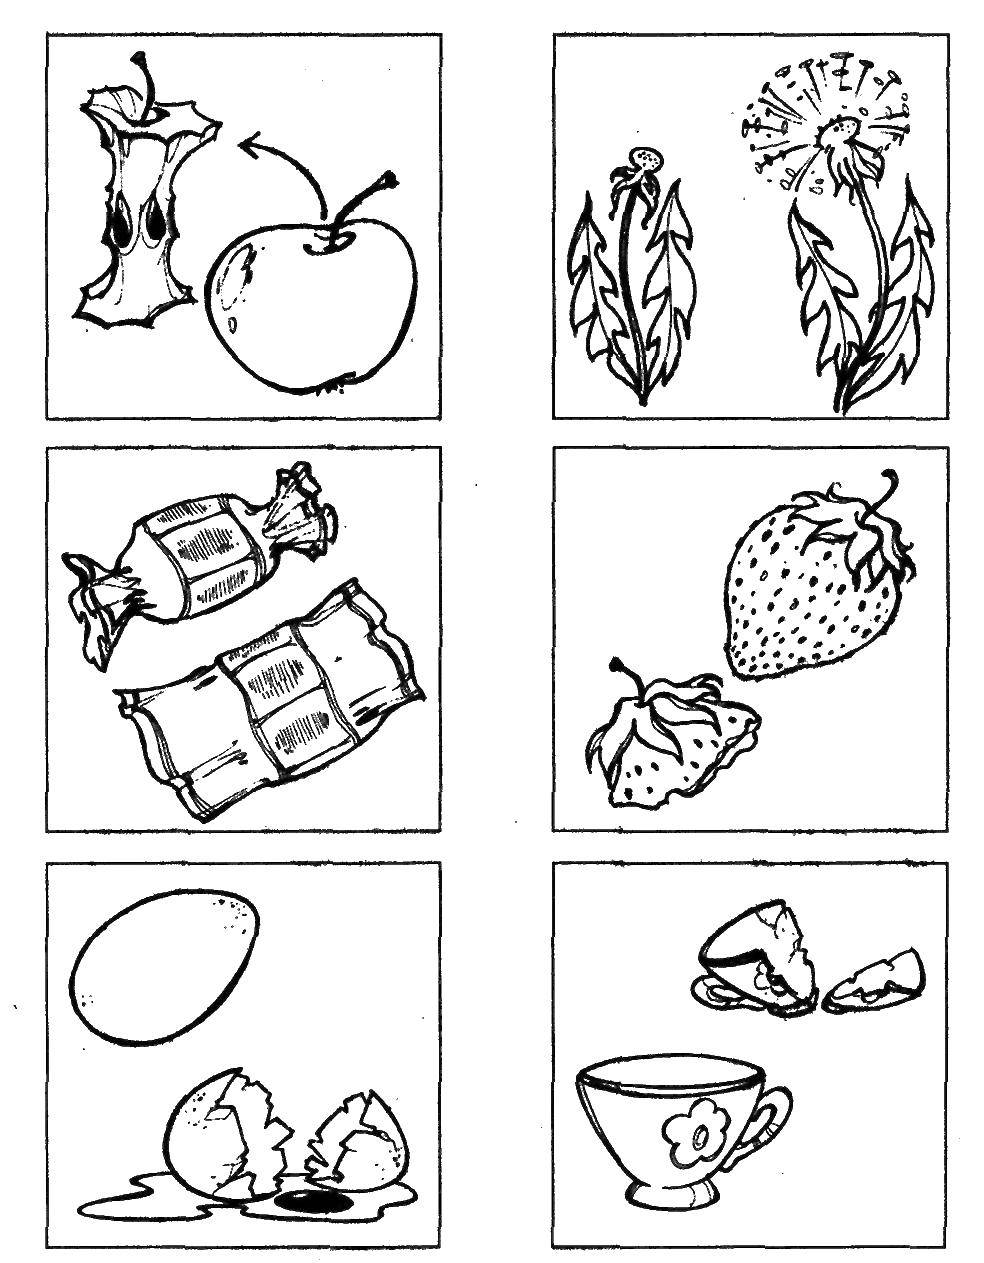 Coloring Items. Category find items. Tags:  the items, found objects, image.